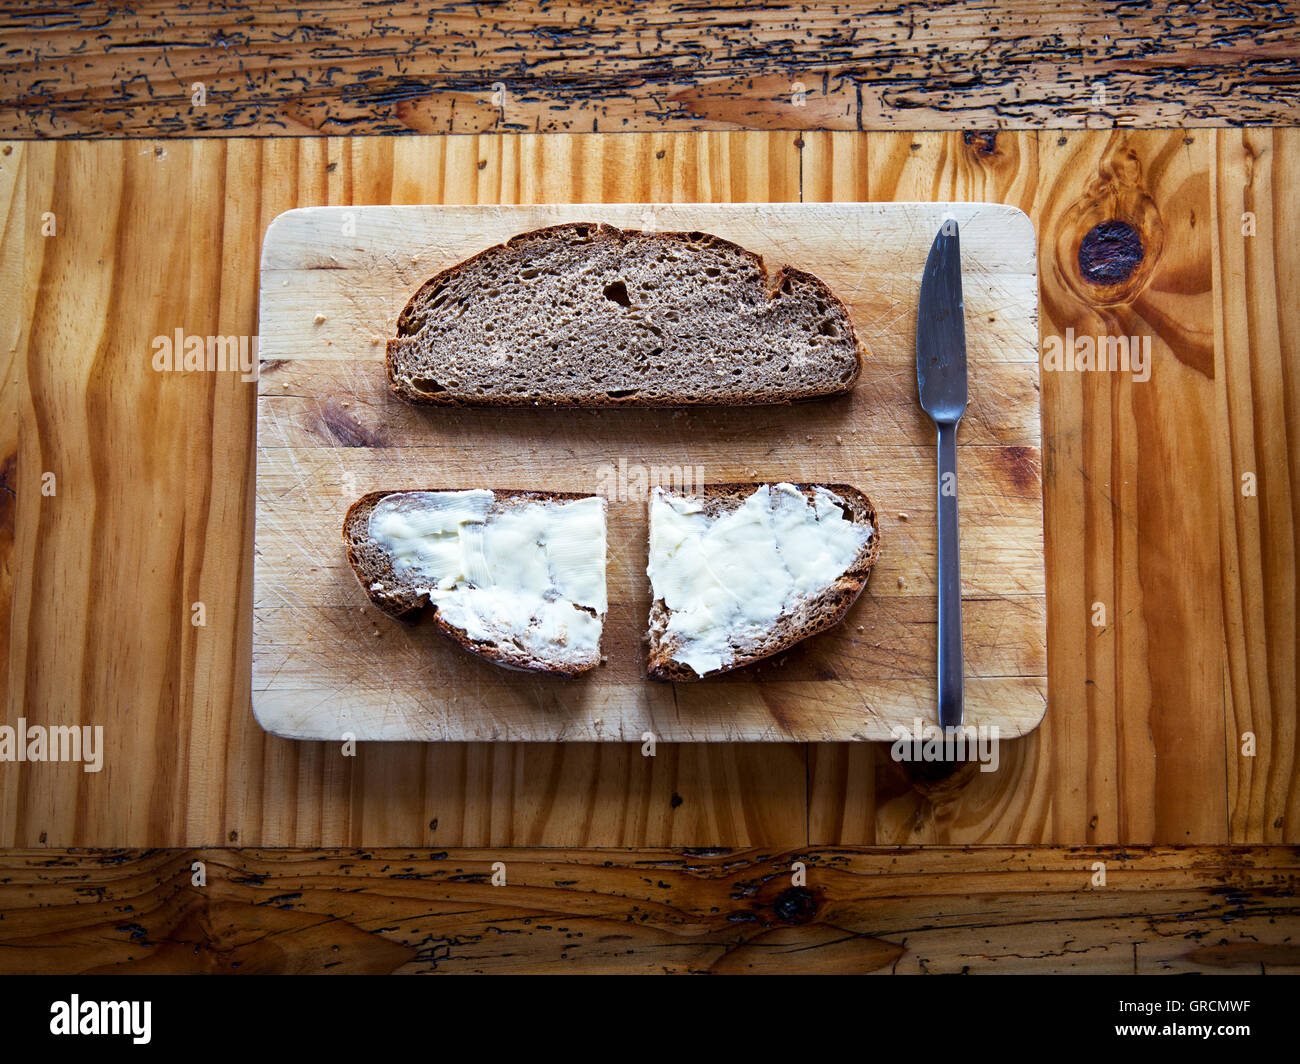 Choppingboard With Butter And Bread On A Wooden Table Stock Photo